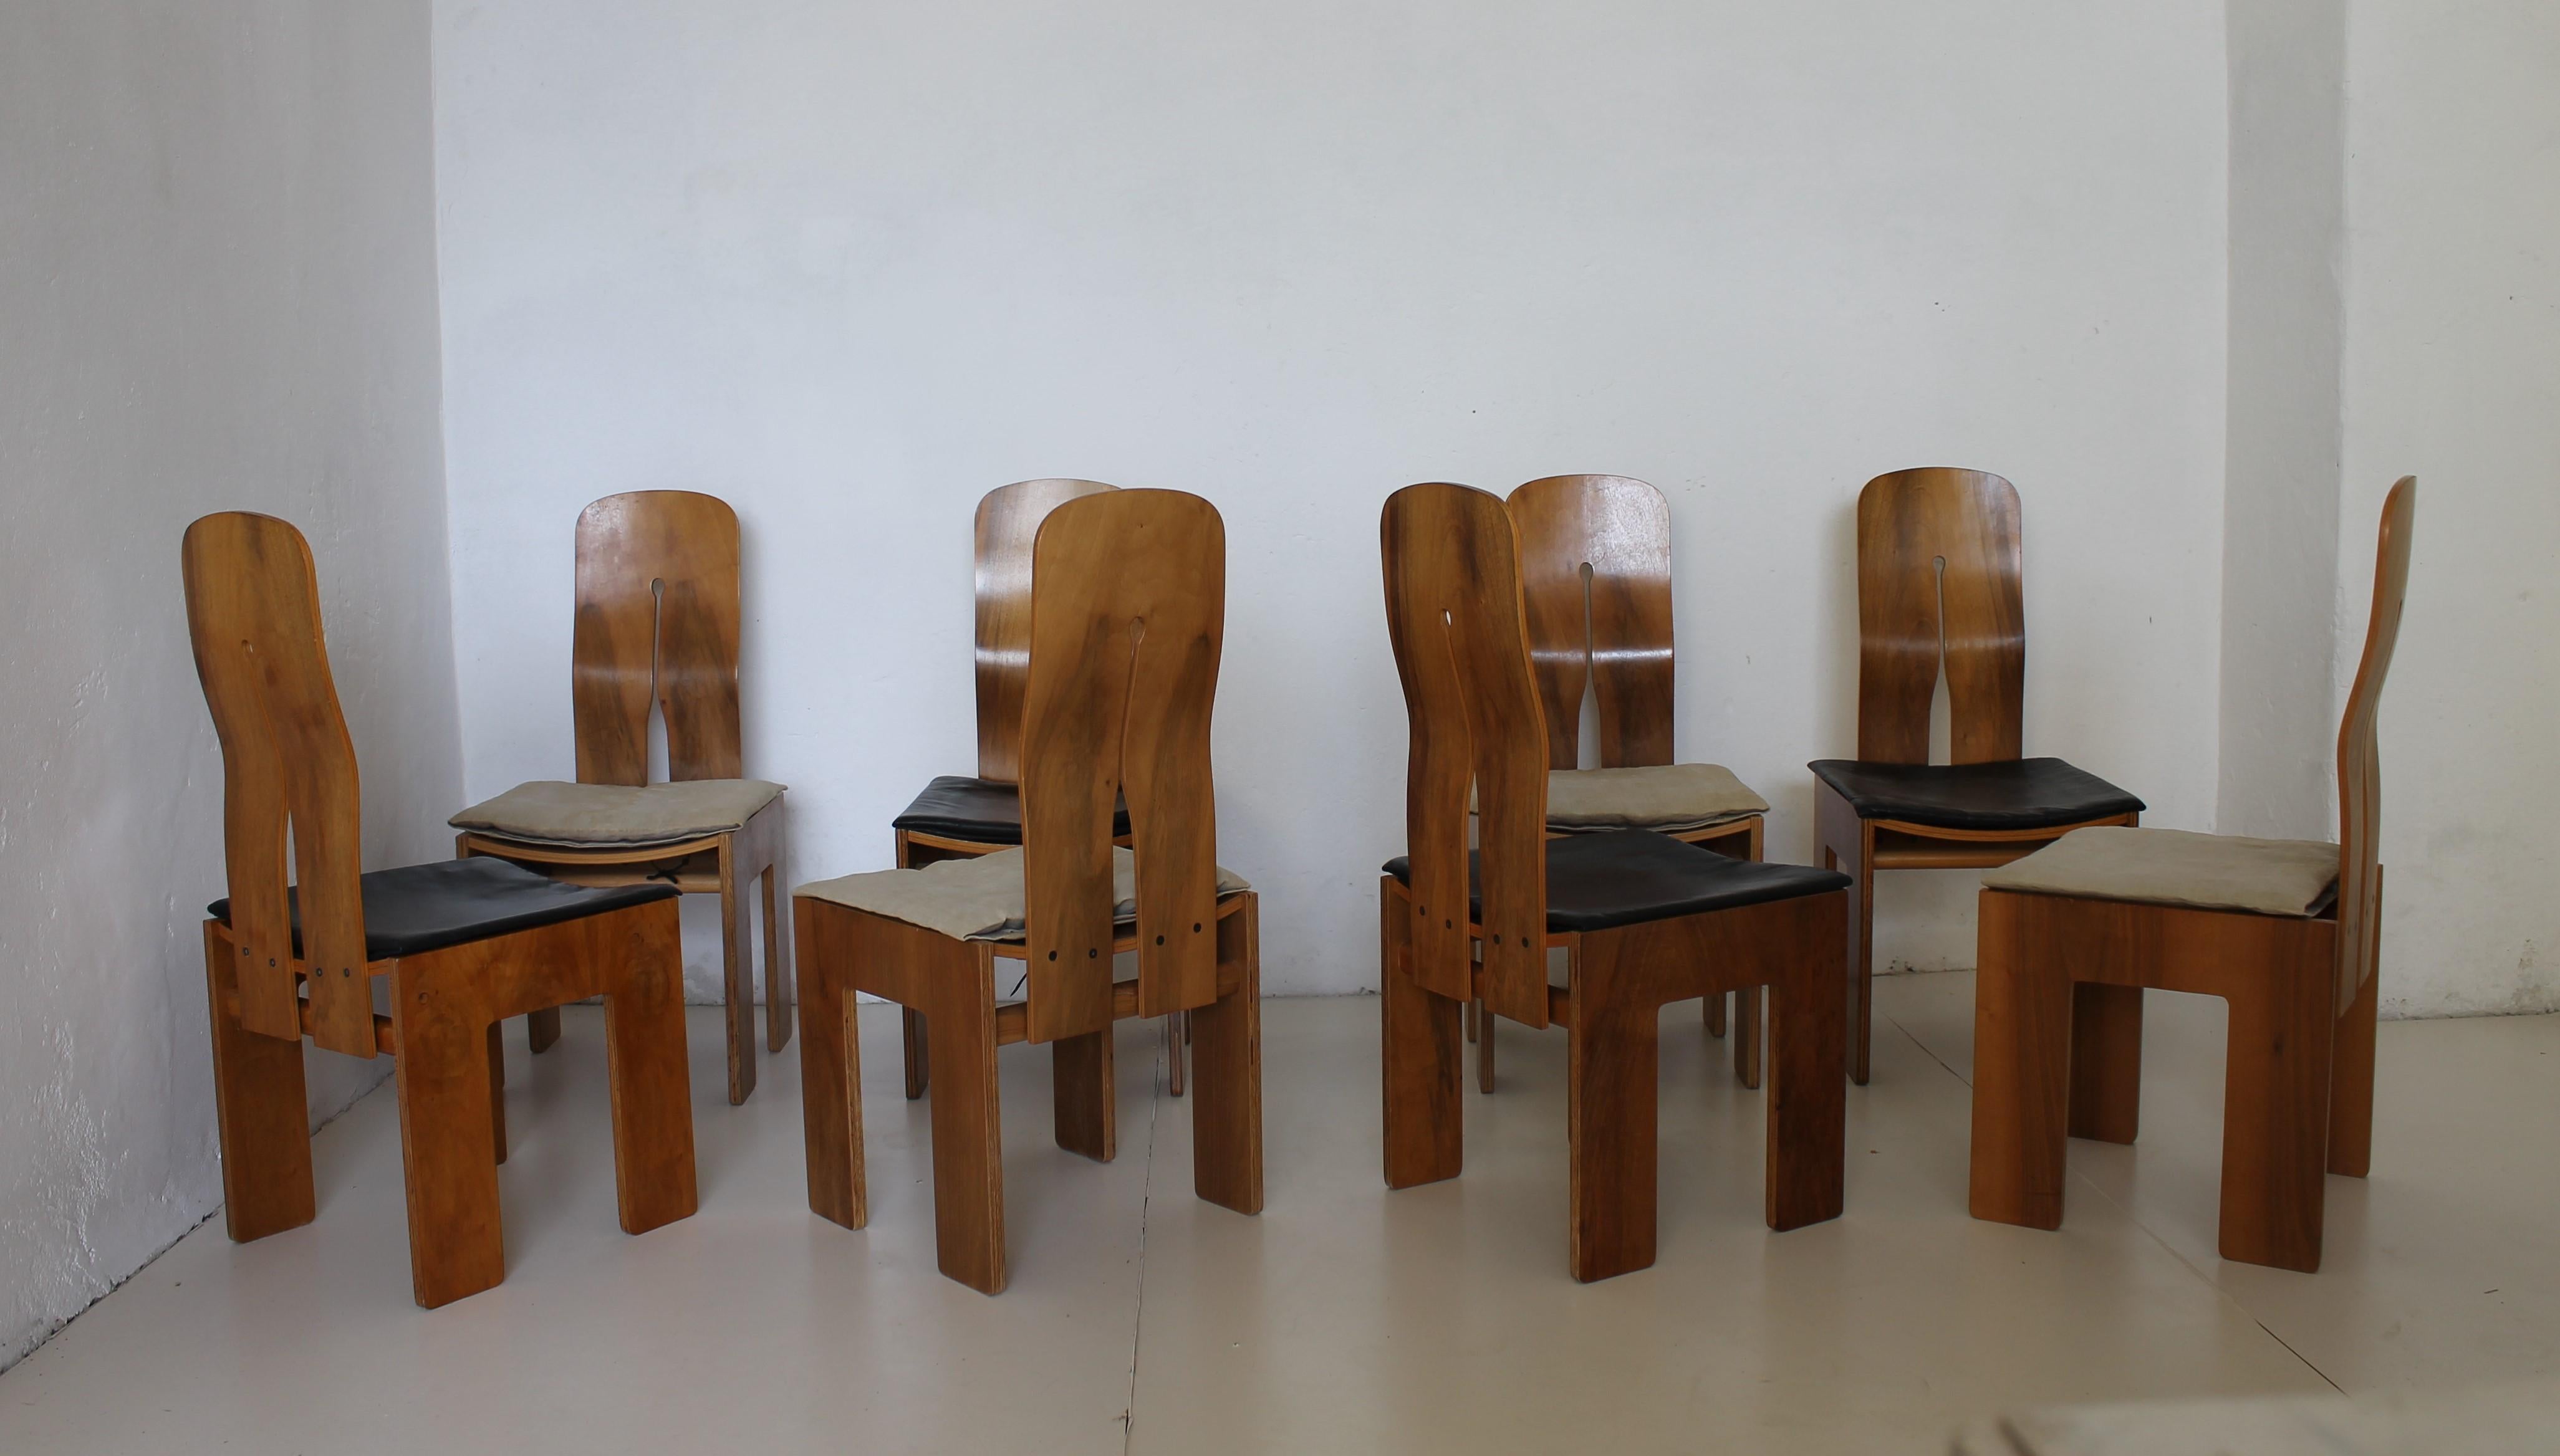 Eight Carlo Scarpa walnut chairs, black leather cushions mod. 1934 / 765 for Bernini 1977.
All cushions in black leather.

765 is planned by Carlo Scarpa in 1934, year from which the chair will take subsequently the name, but it will be produced